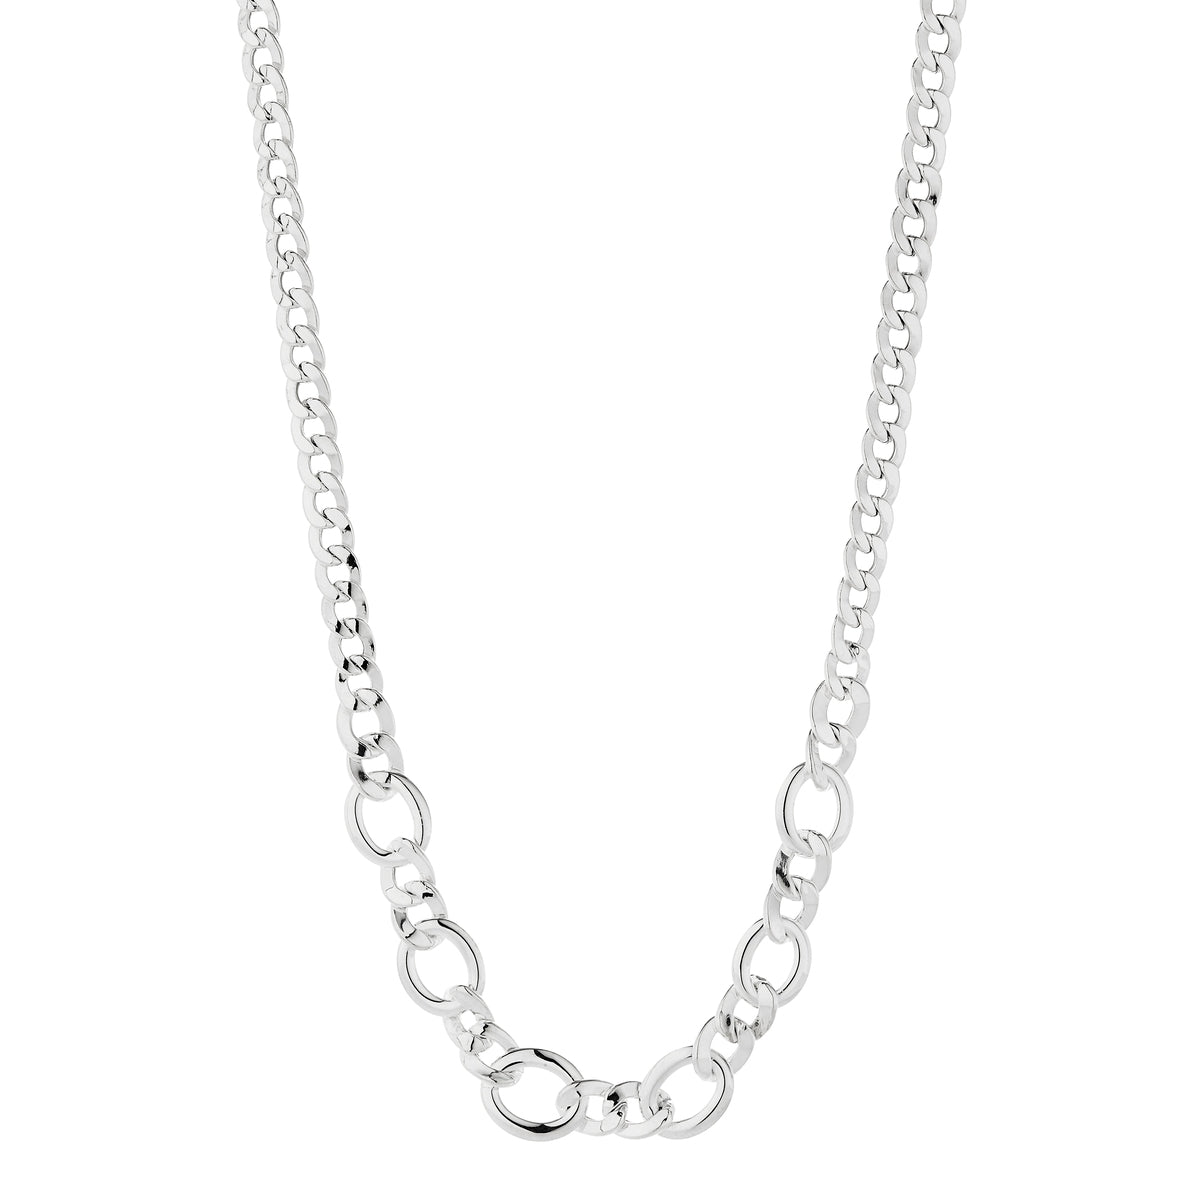 Silver Hollow-Tube, Fancy Curb & Oval Link Necklace With Large Parrot Clasp, 46cm